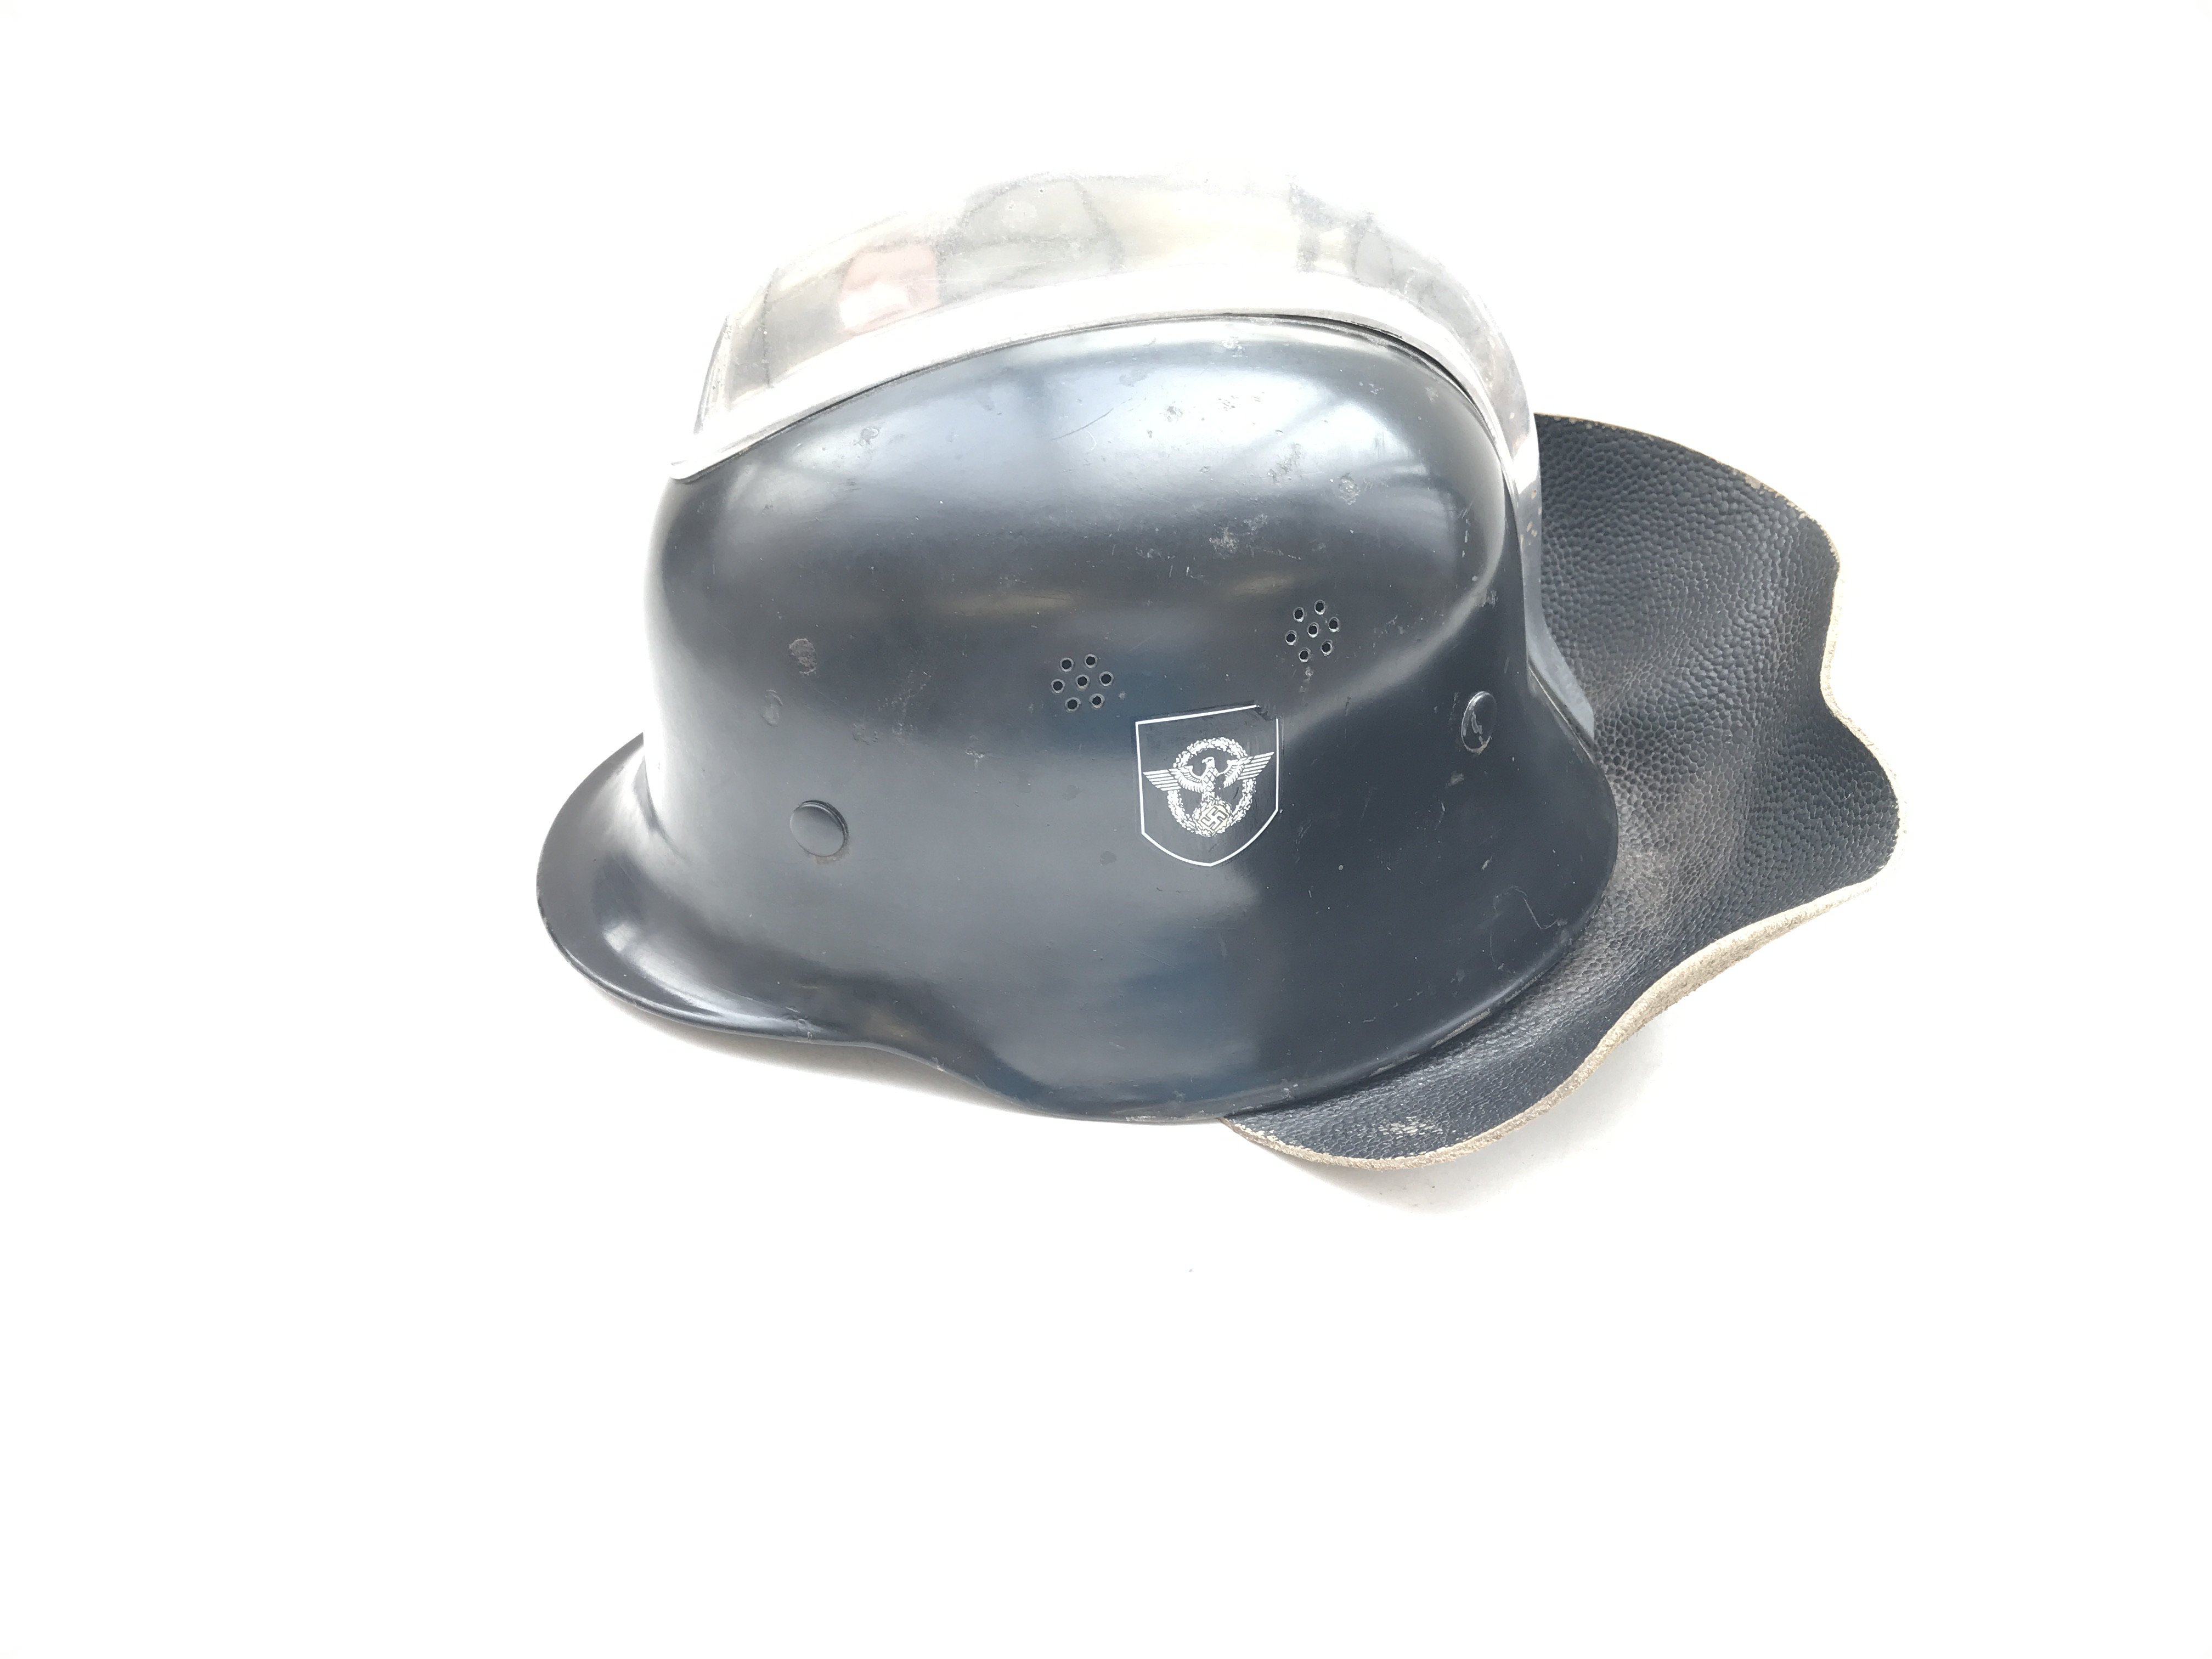 3rd Reich Fire Service Helmet with Leather Nape Pr - Image 2 of 3